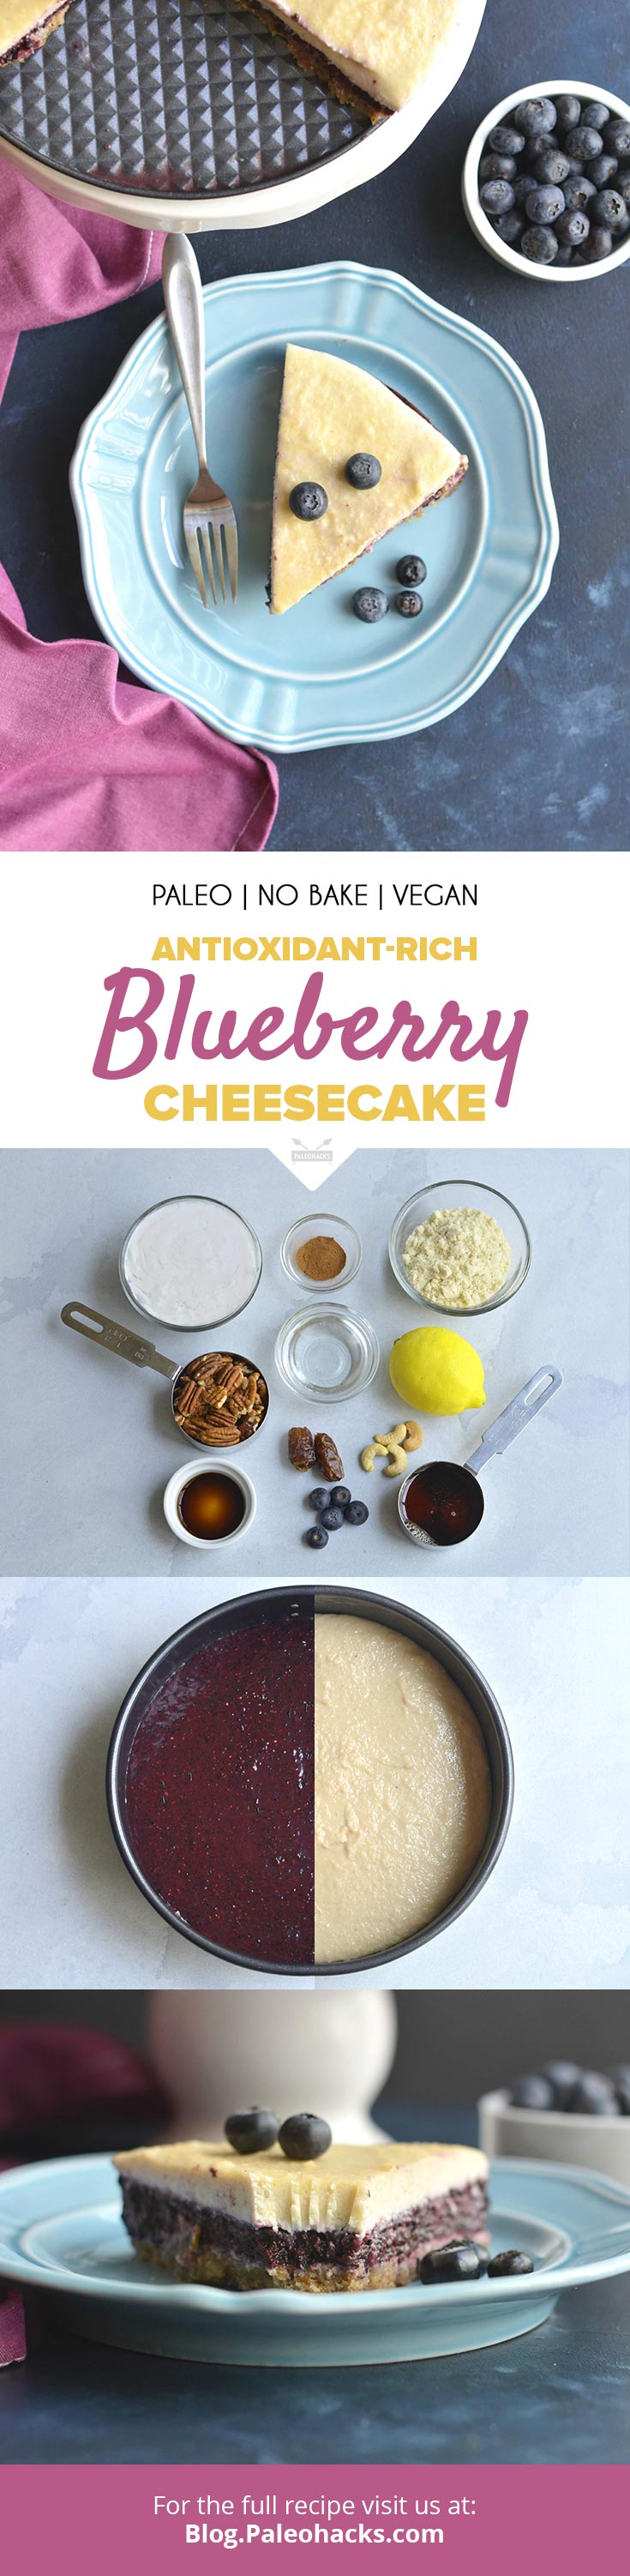 Whip up this three-layer Blueberry Cheesecake for a dessert loaded with antioxidant-rich nutrients. Slice up a piece and fill your day with joy.